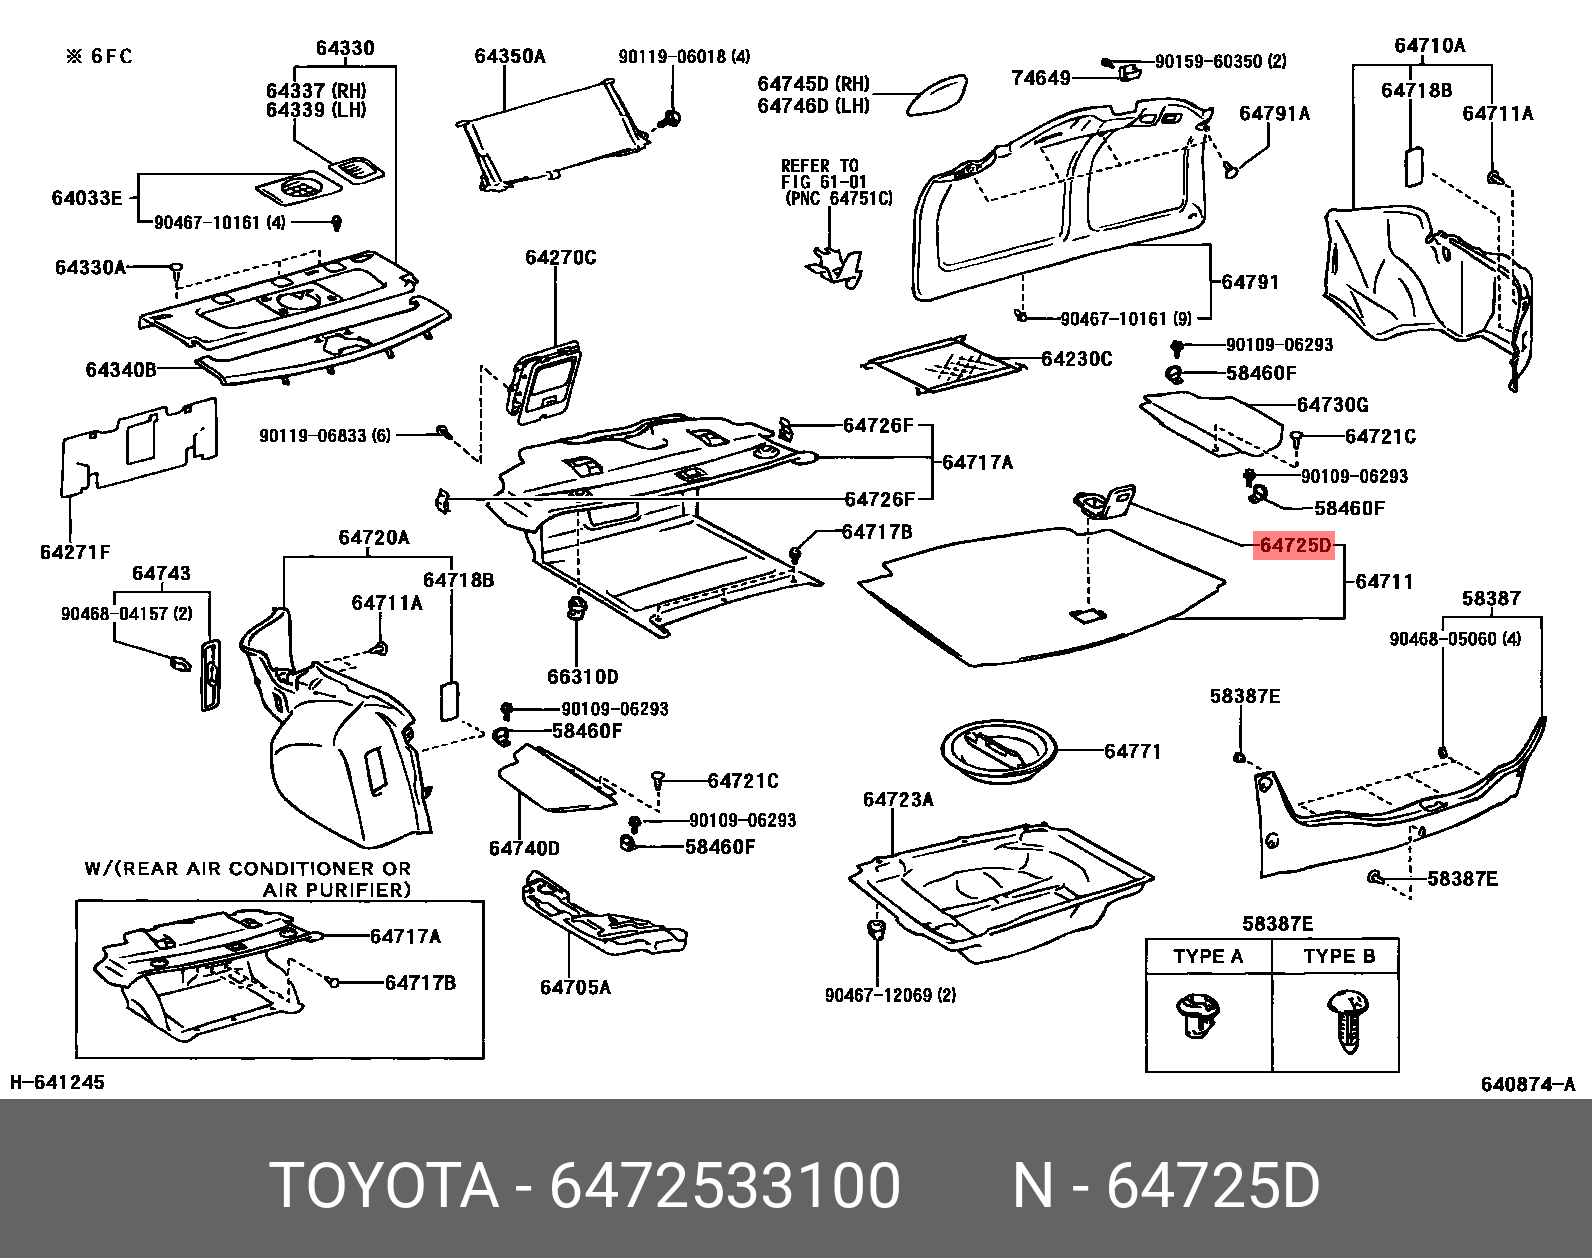 CAMRY 201706-, HOOK, LUGGAGE COMPARTMENT TRIM, NO.1